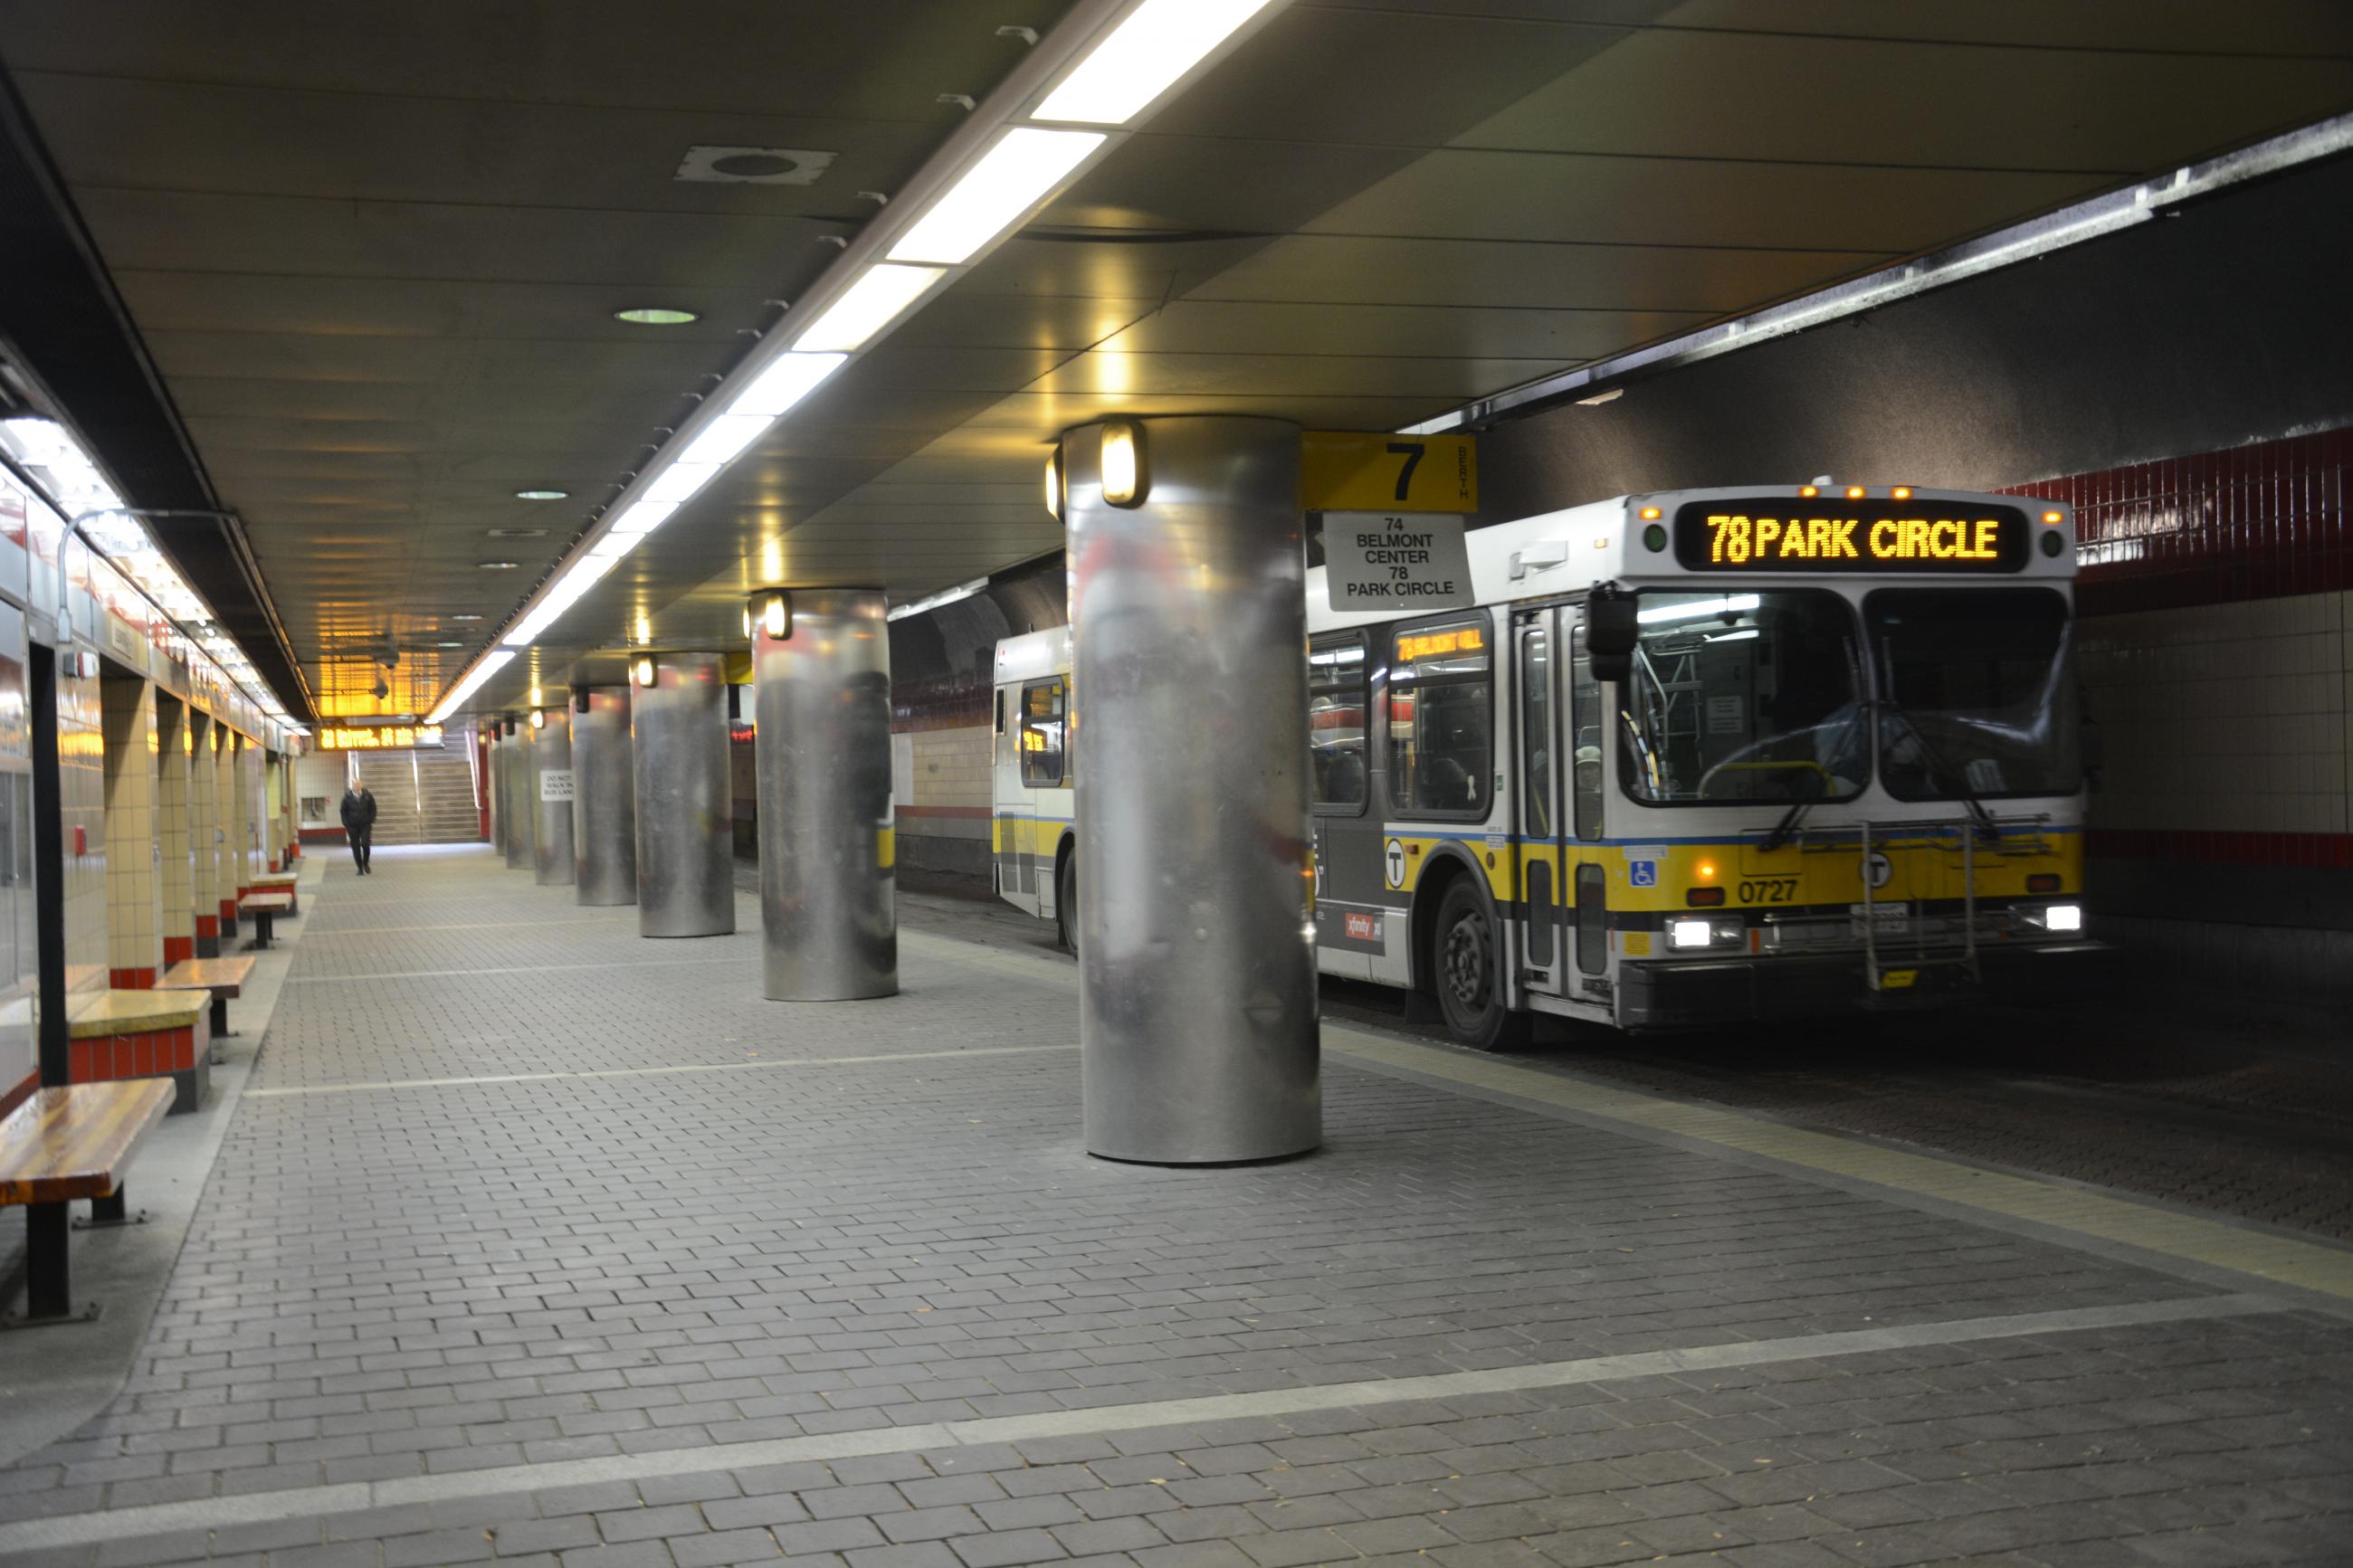 Route 78 bus pulls into the upper busway at Harvard Station